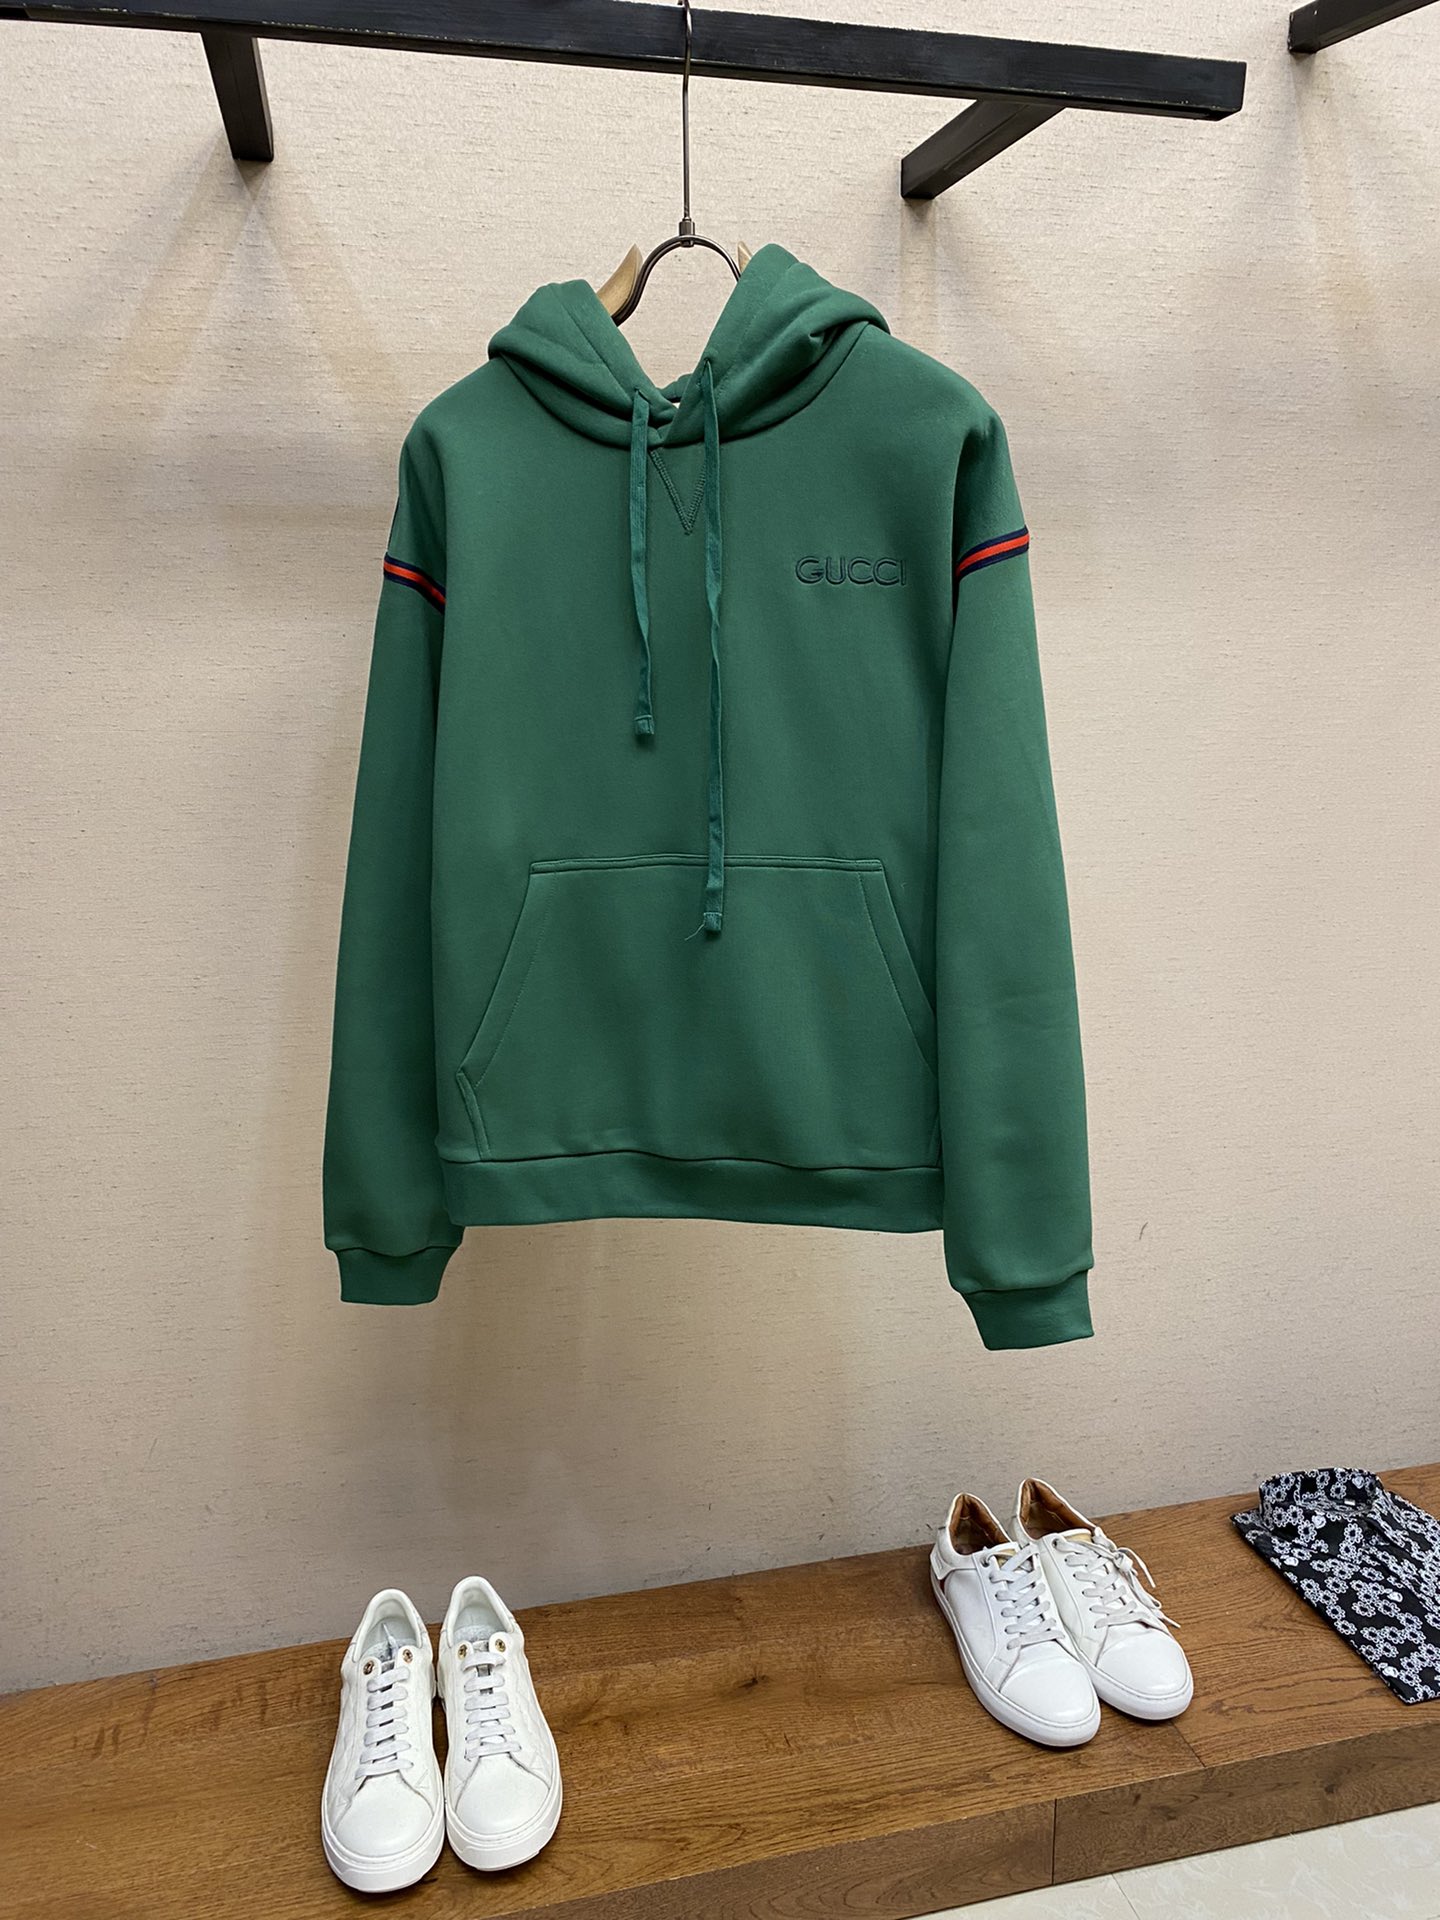 Copy
 Gucci Clothing Hoodies Blue Green Red Embroidery Cotton Fabric Knitted Knitting Linen Hooded Top